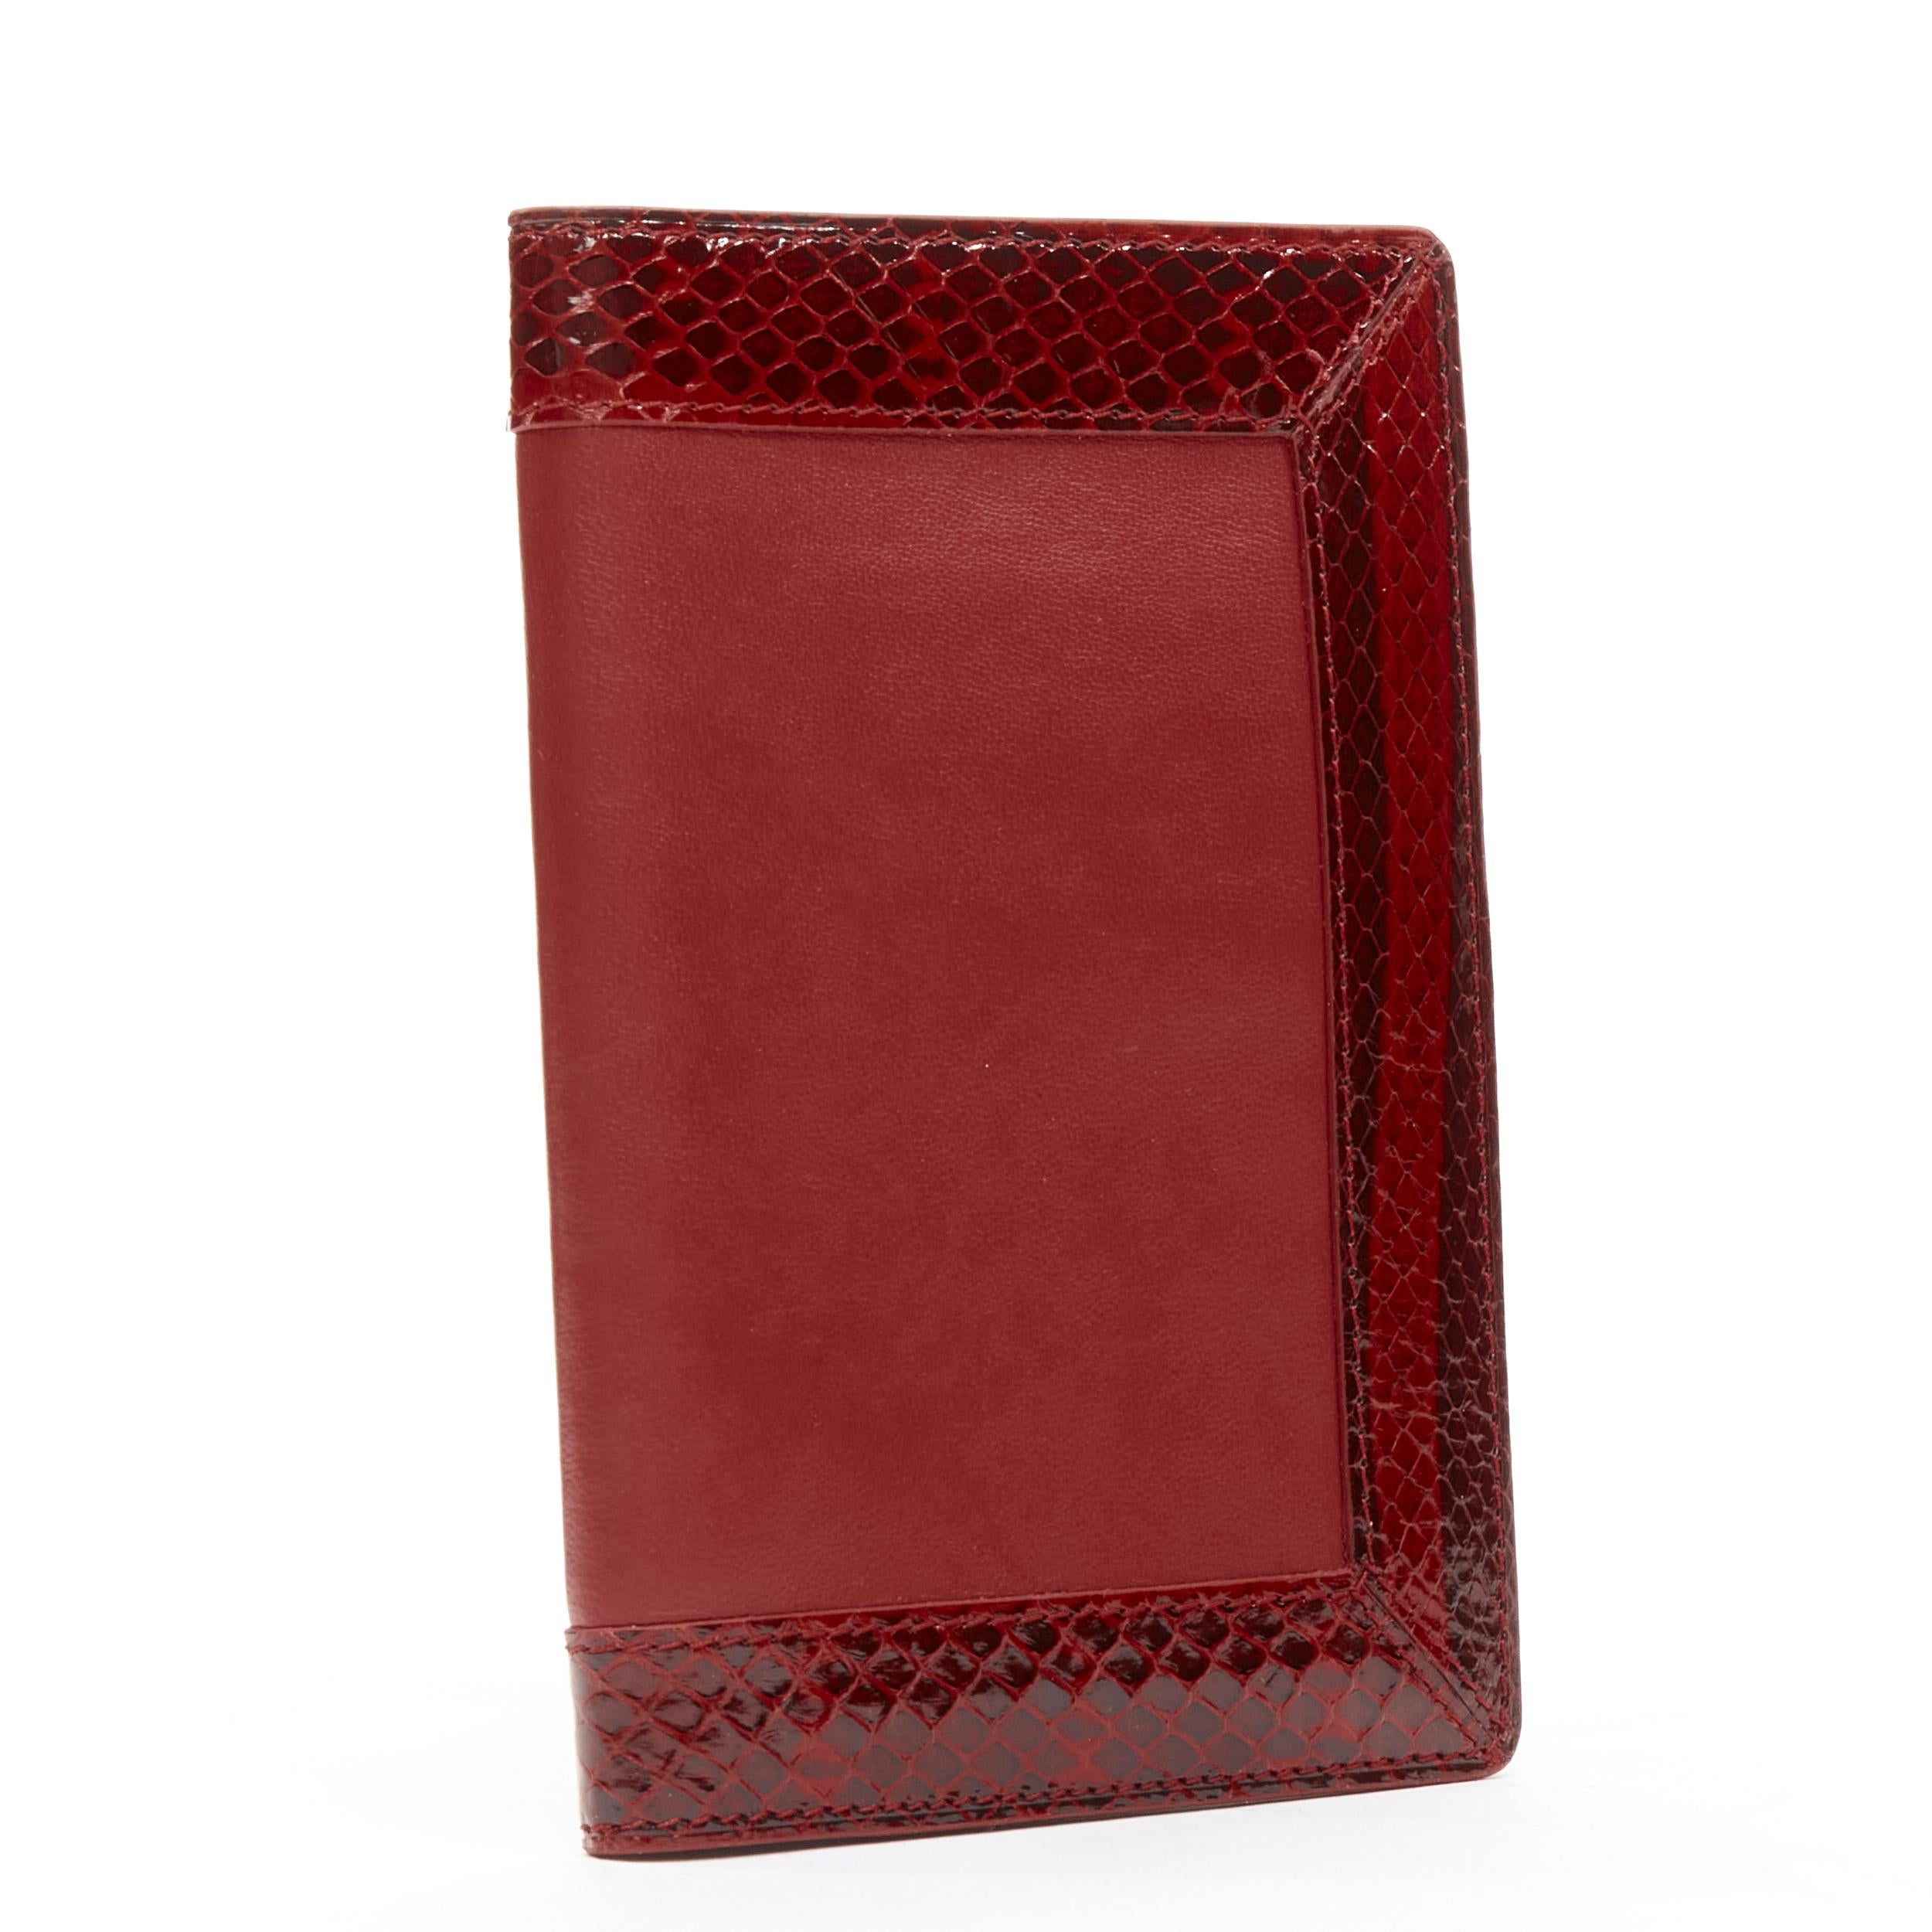 KWANPEN red glossy scaled leather trim bifold passport card holder
Brand: Kwanpen
Material: Calfskin Leather
Color: Red
Pattern: Solid

CONDITION:
Condition: Excellent, this item was pre-owned and is in excellent condition. 
Comes with: One dust